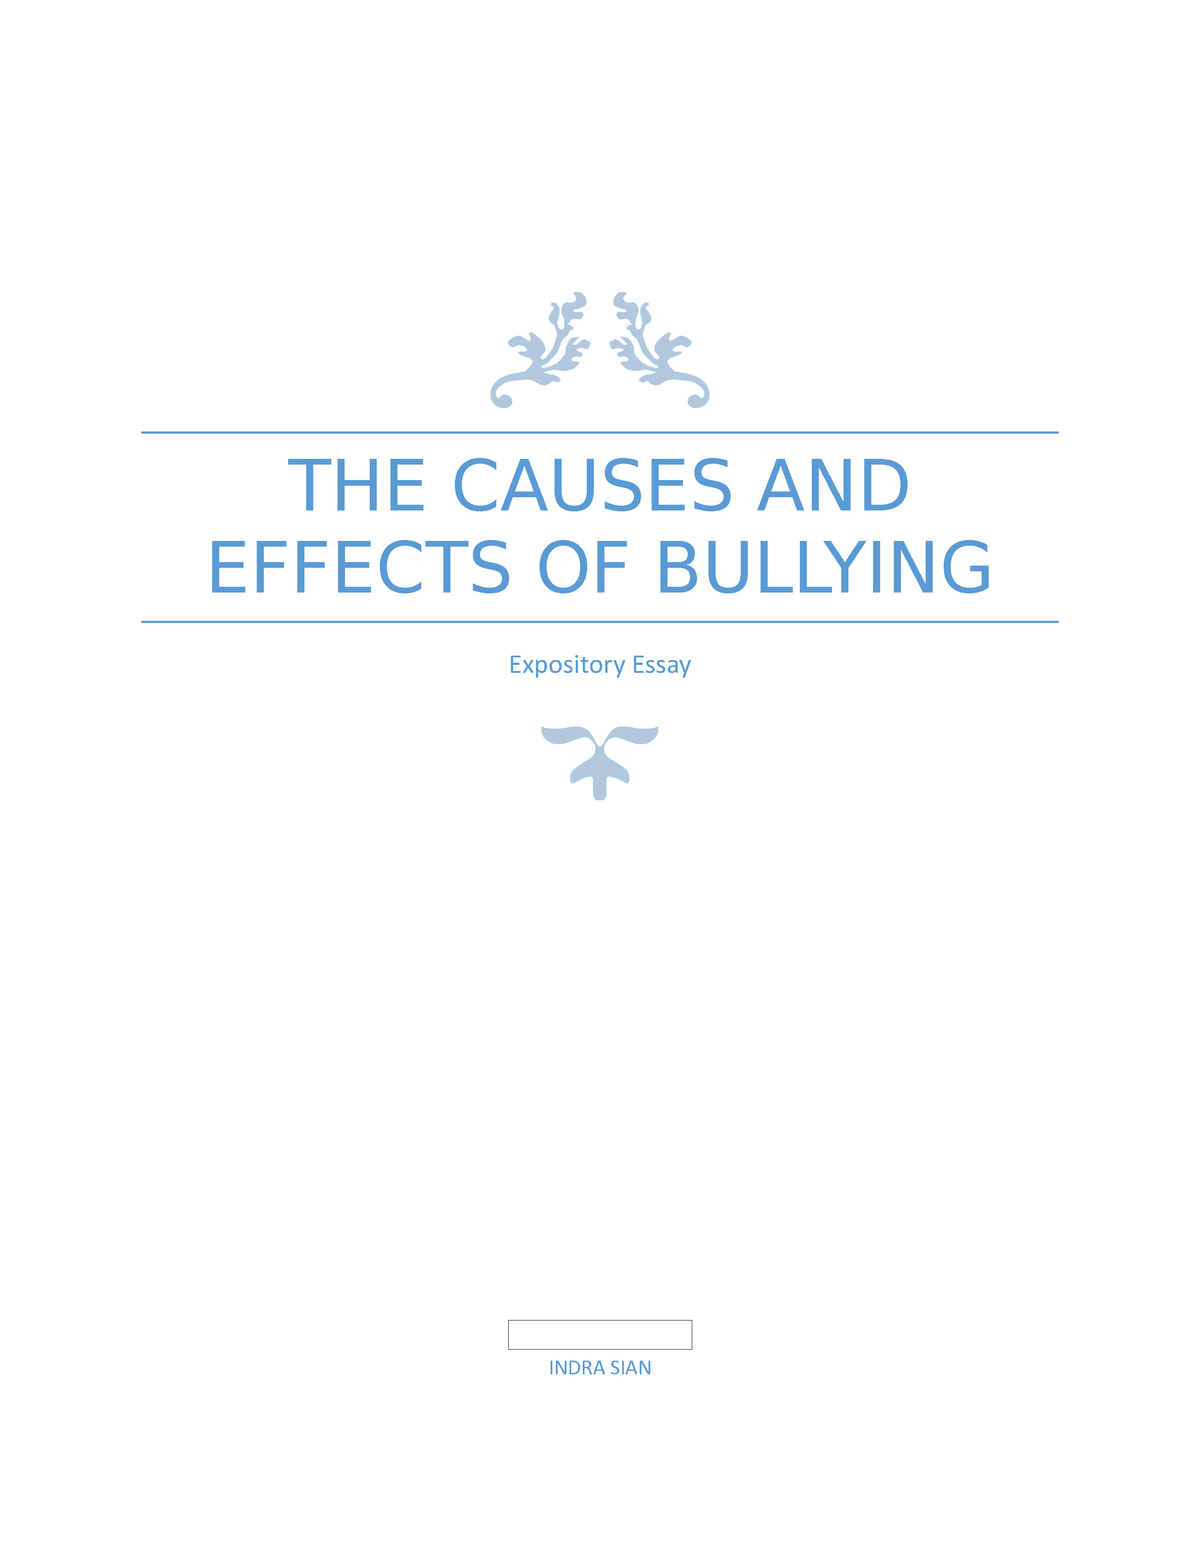 descriptive research design about bullying